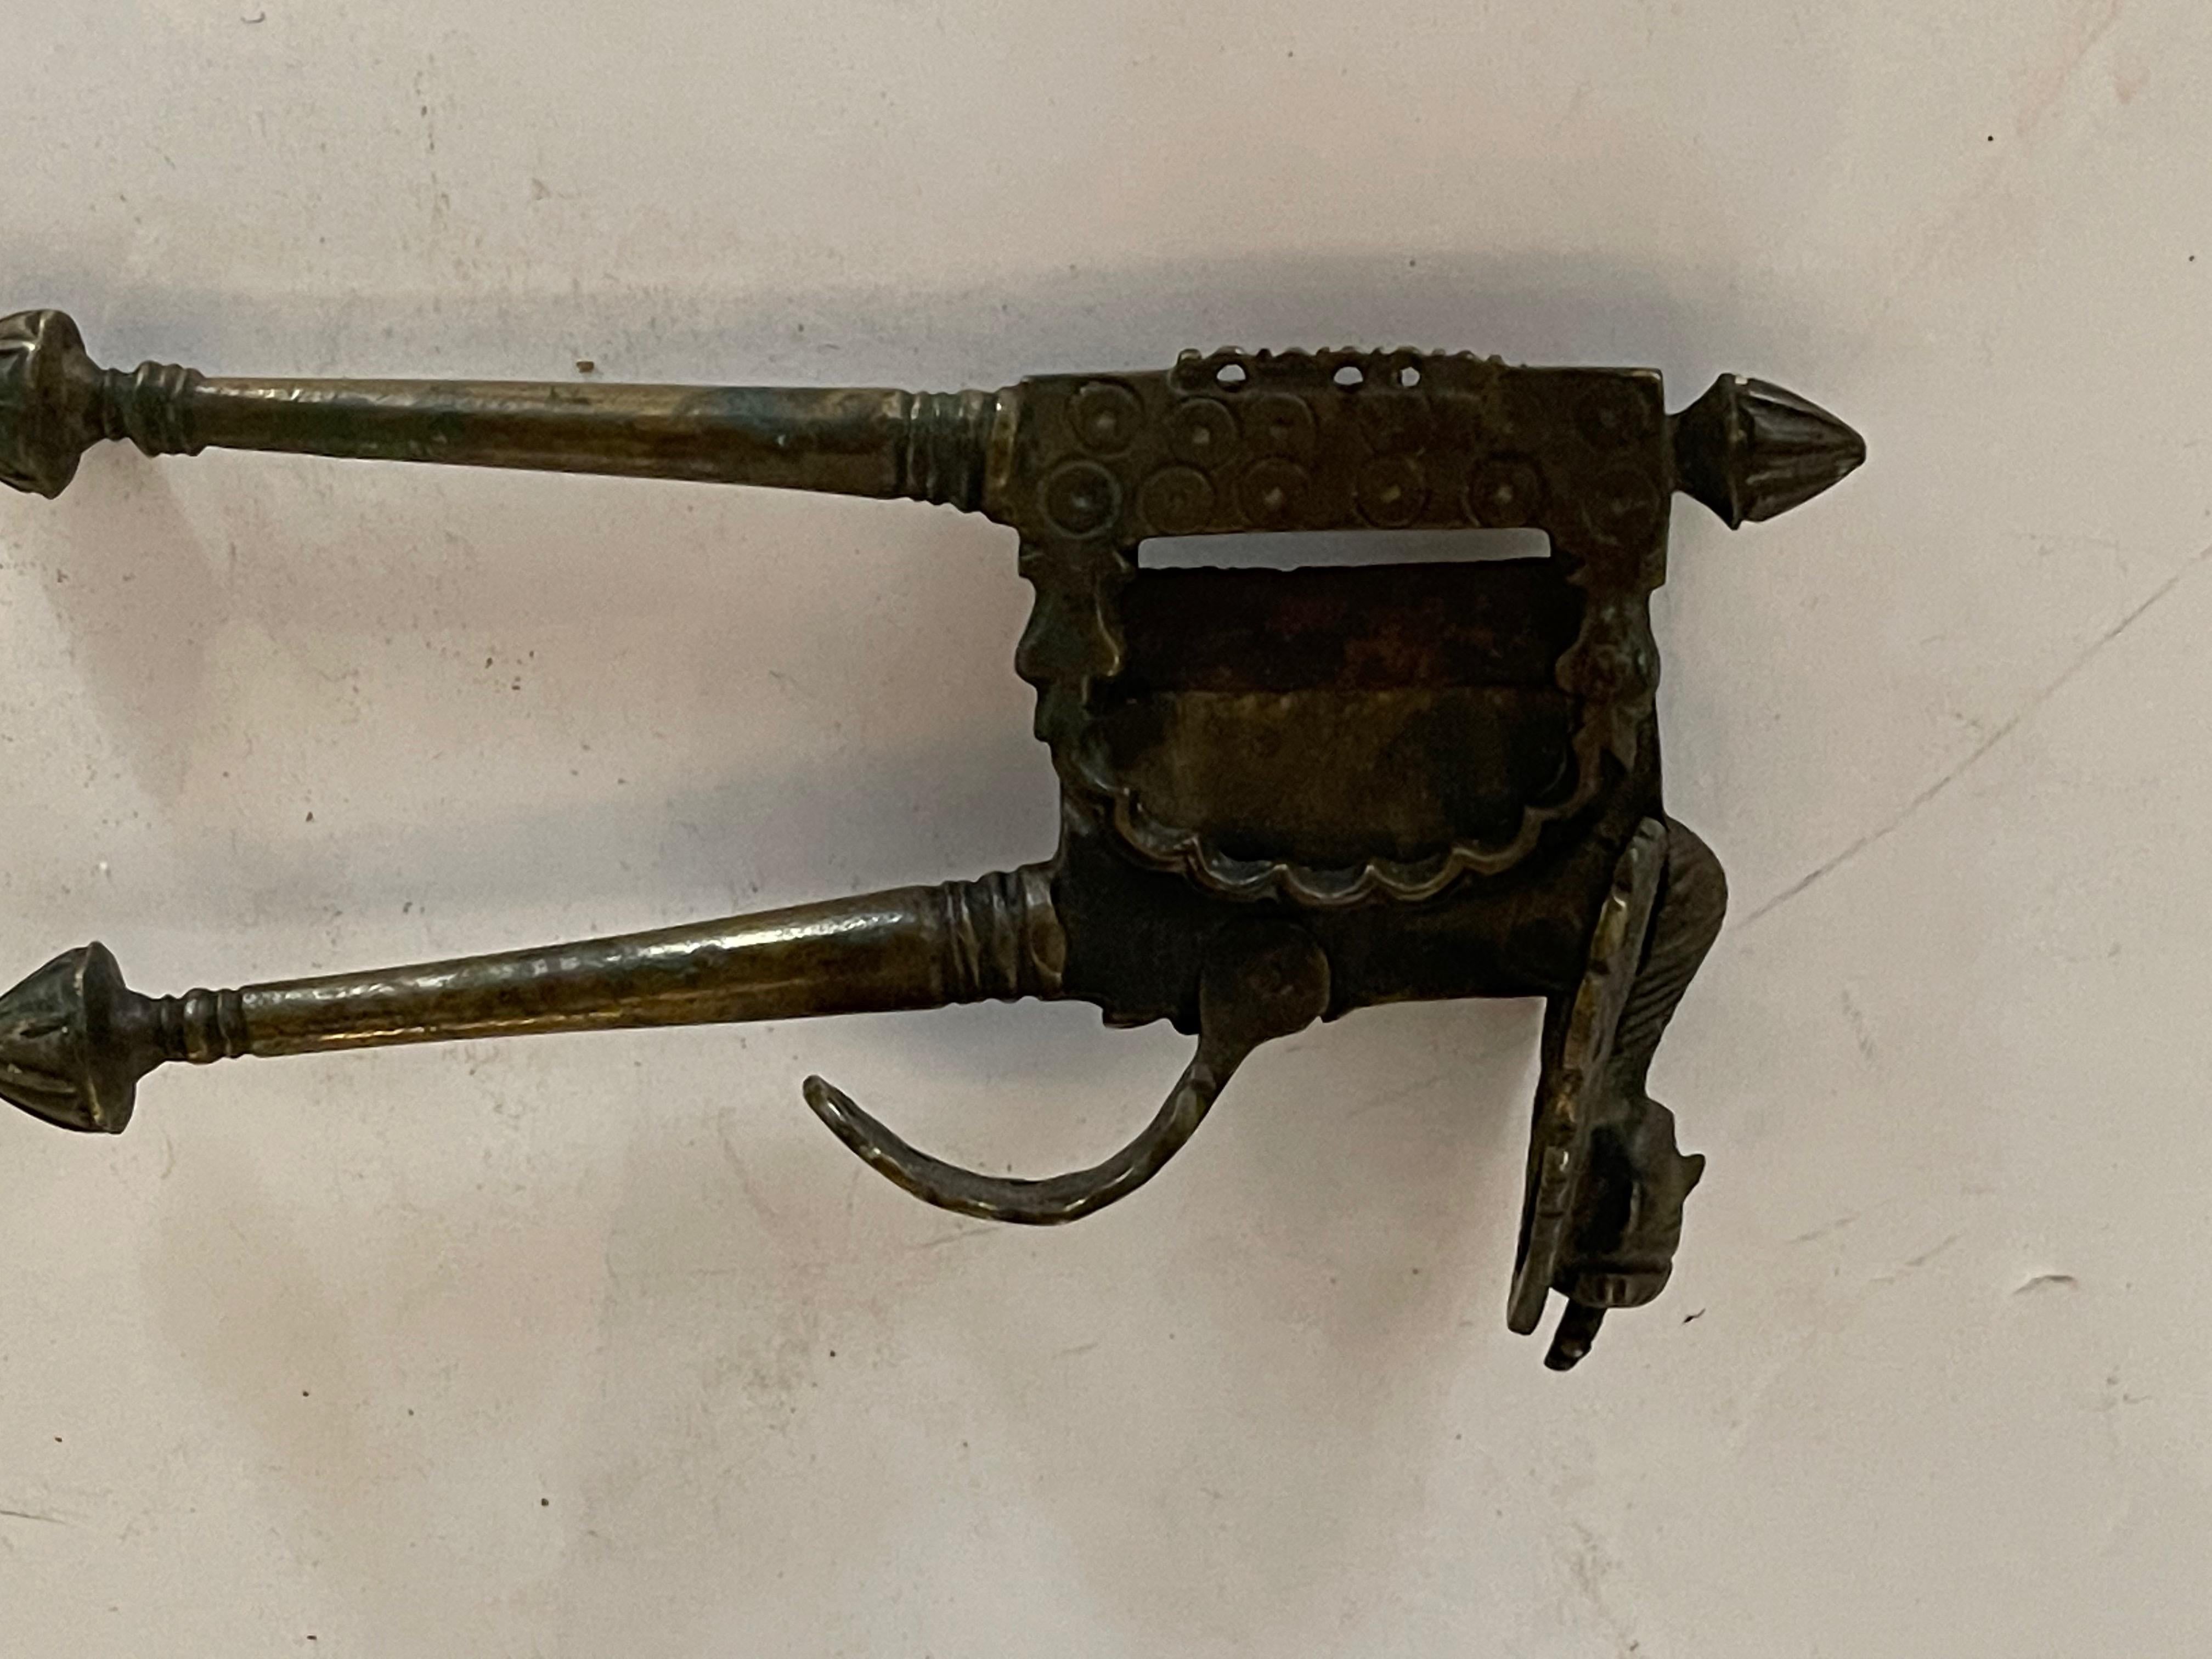 A figurative iron cutter. Made in the early 19th century. We are not sure what this was used for , but very interesting